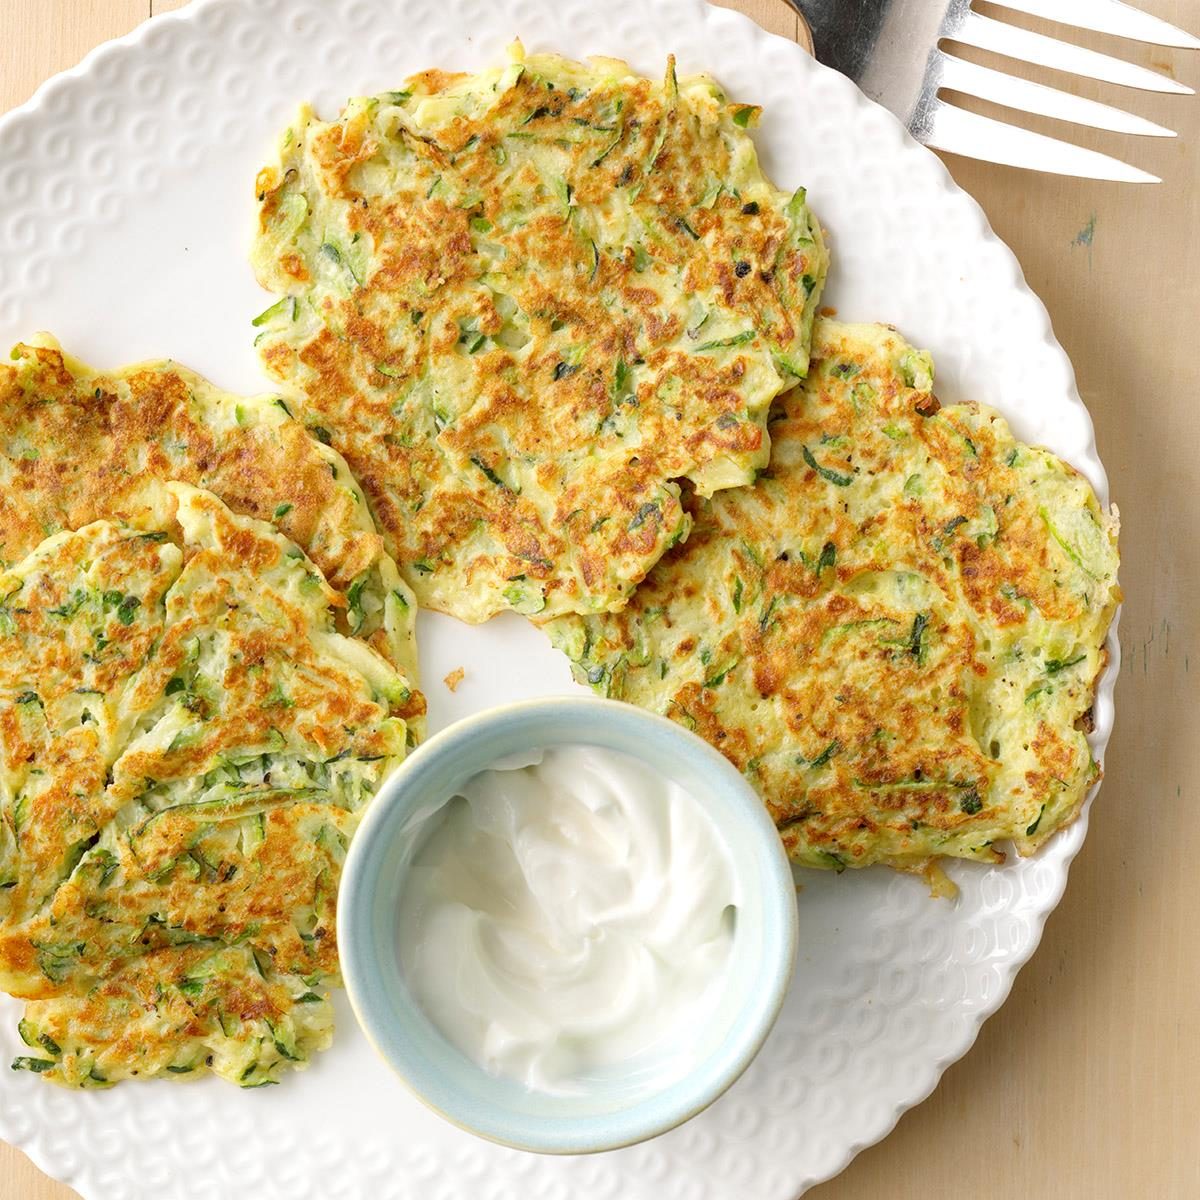 34 Skillet Zucchini Recipes That'll Make a Quick and Healthy Meal